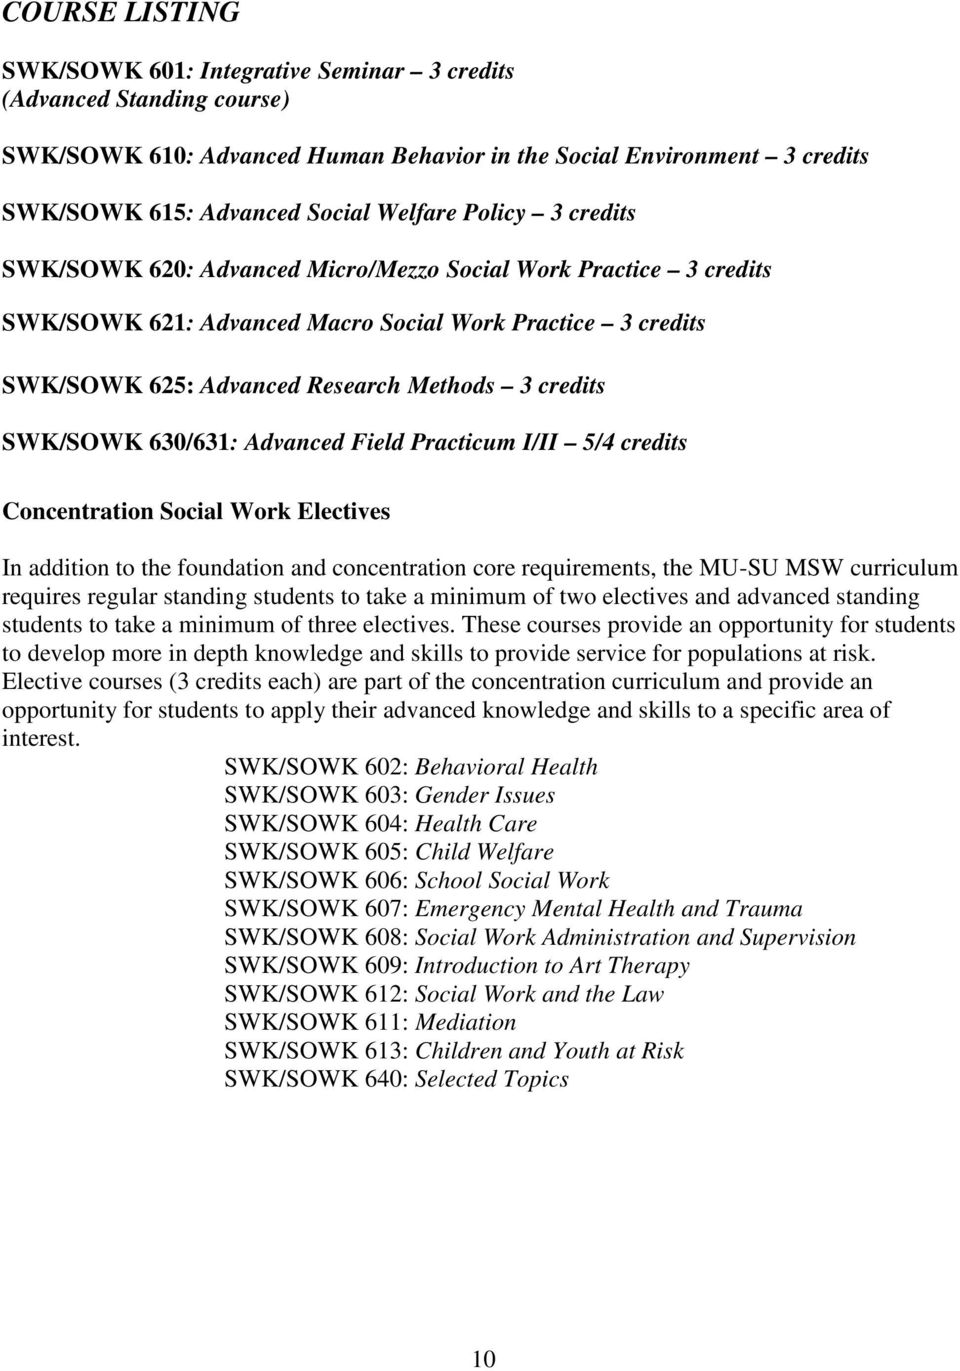 SWK/SOWK 630/631: Advanced Field Practicum I/II 5/4 credits Concentration Social Work Electives In addition to the foundation and concentration core requirements, the MU-SU MSW curriculum requires